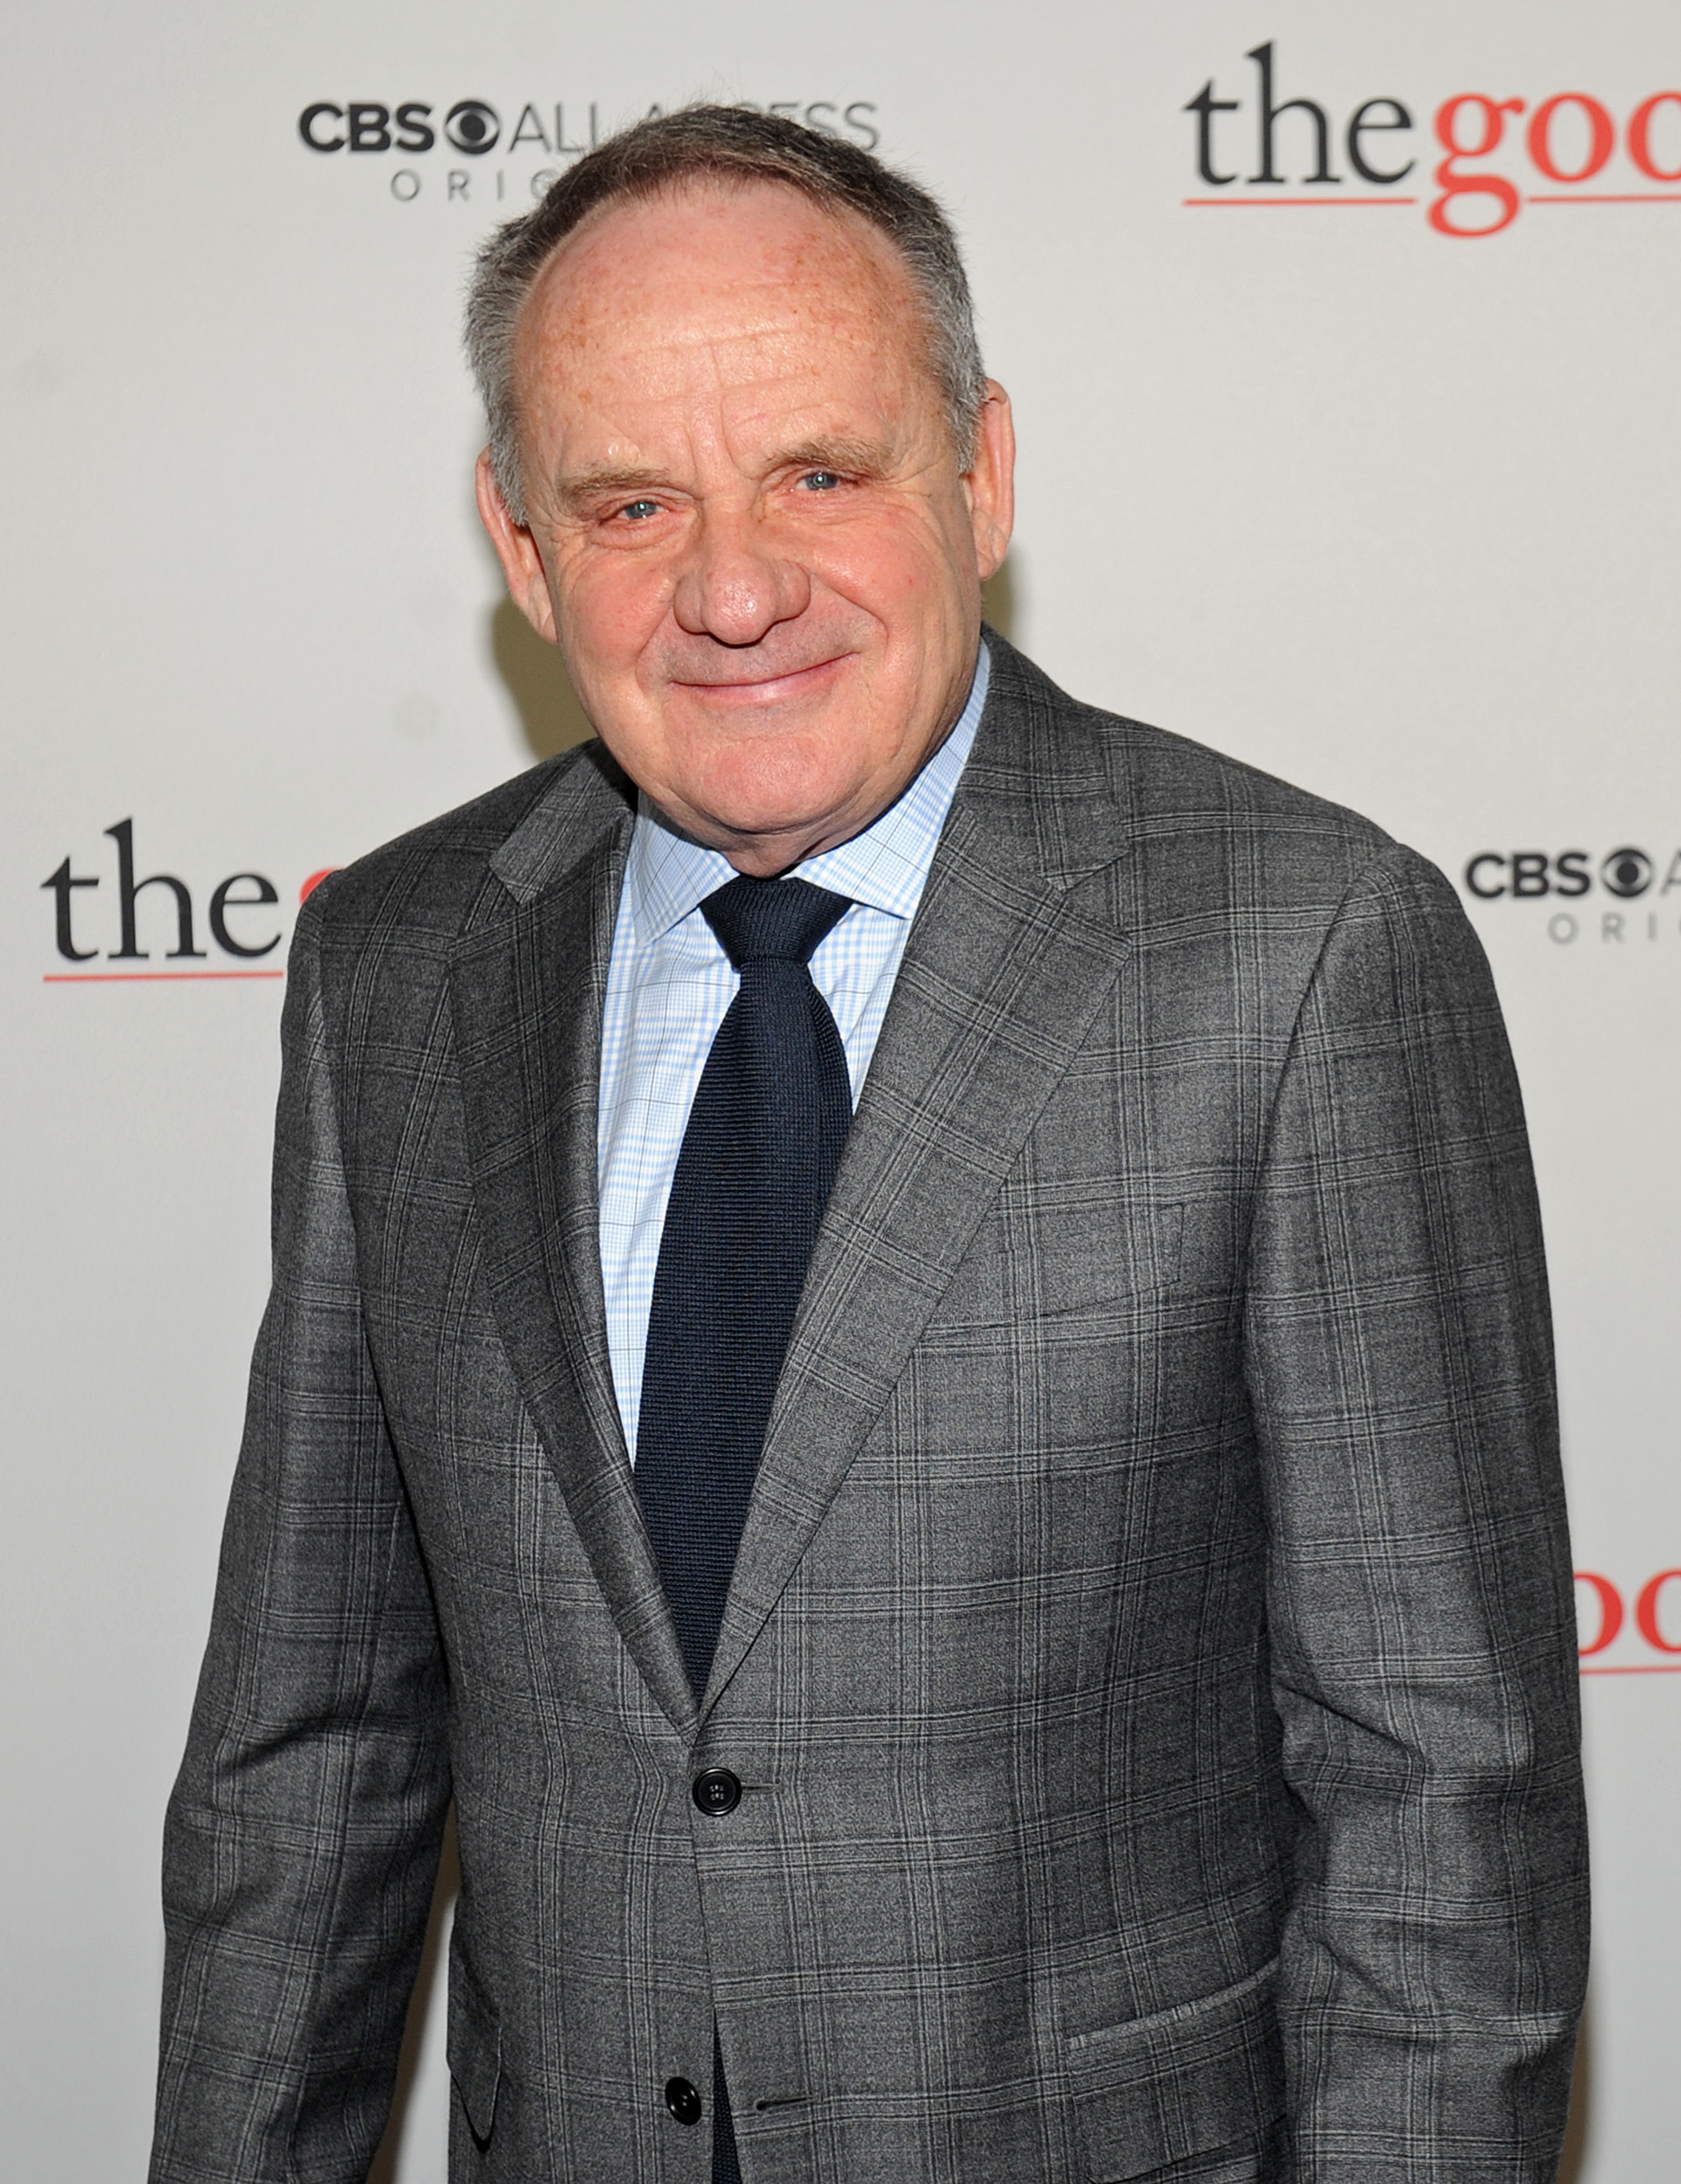 Paul Guilfoyle wears a sharp grey suit on The Good Fight red carpet.